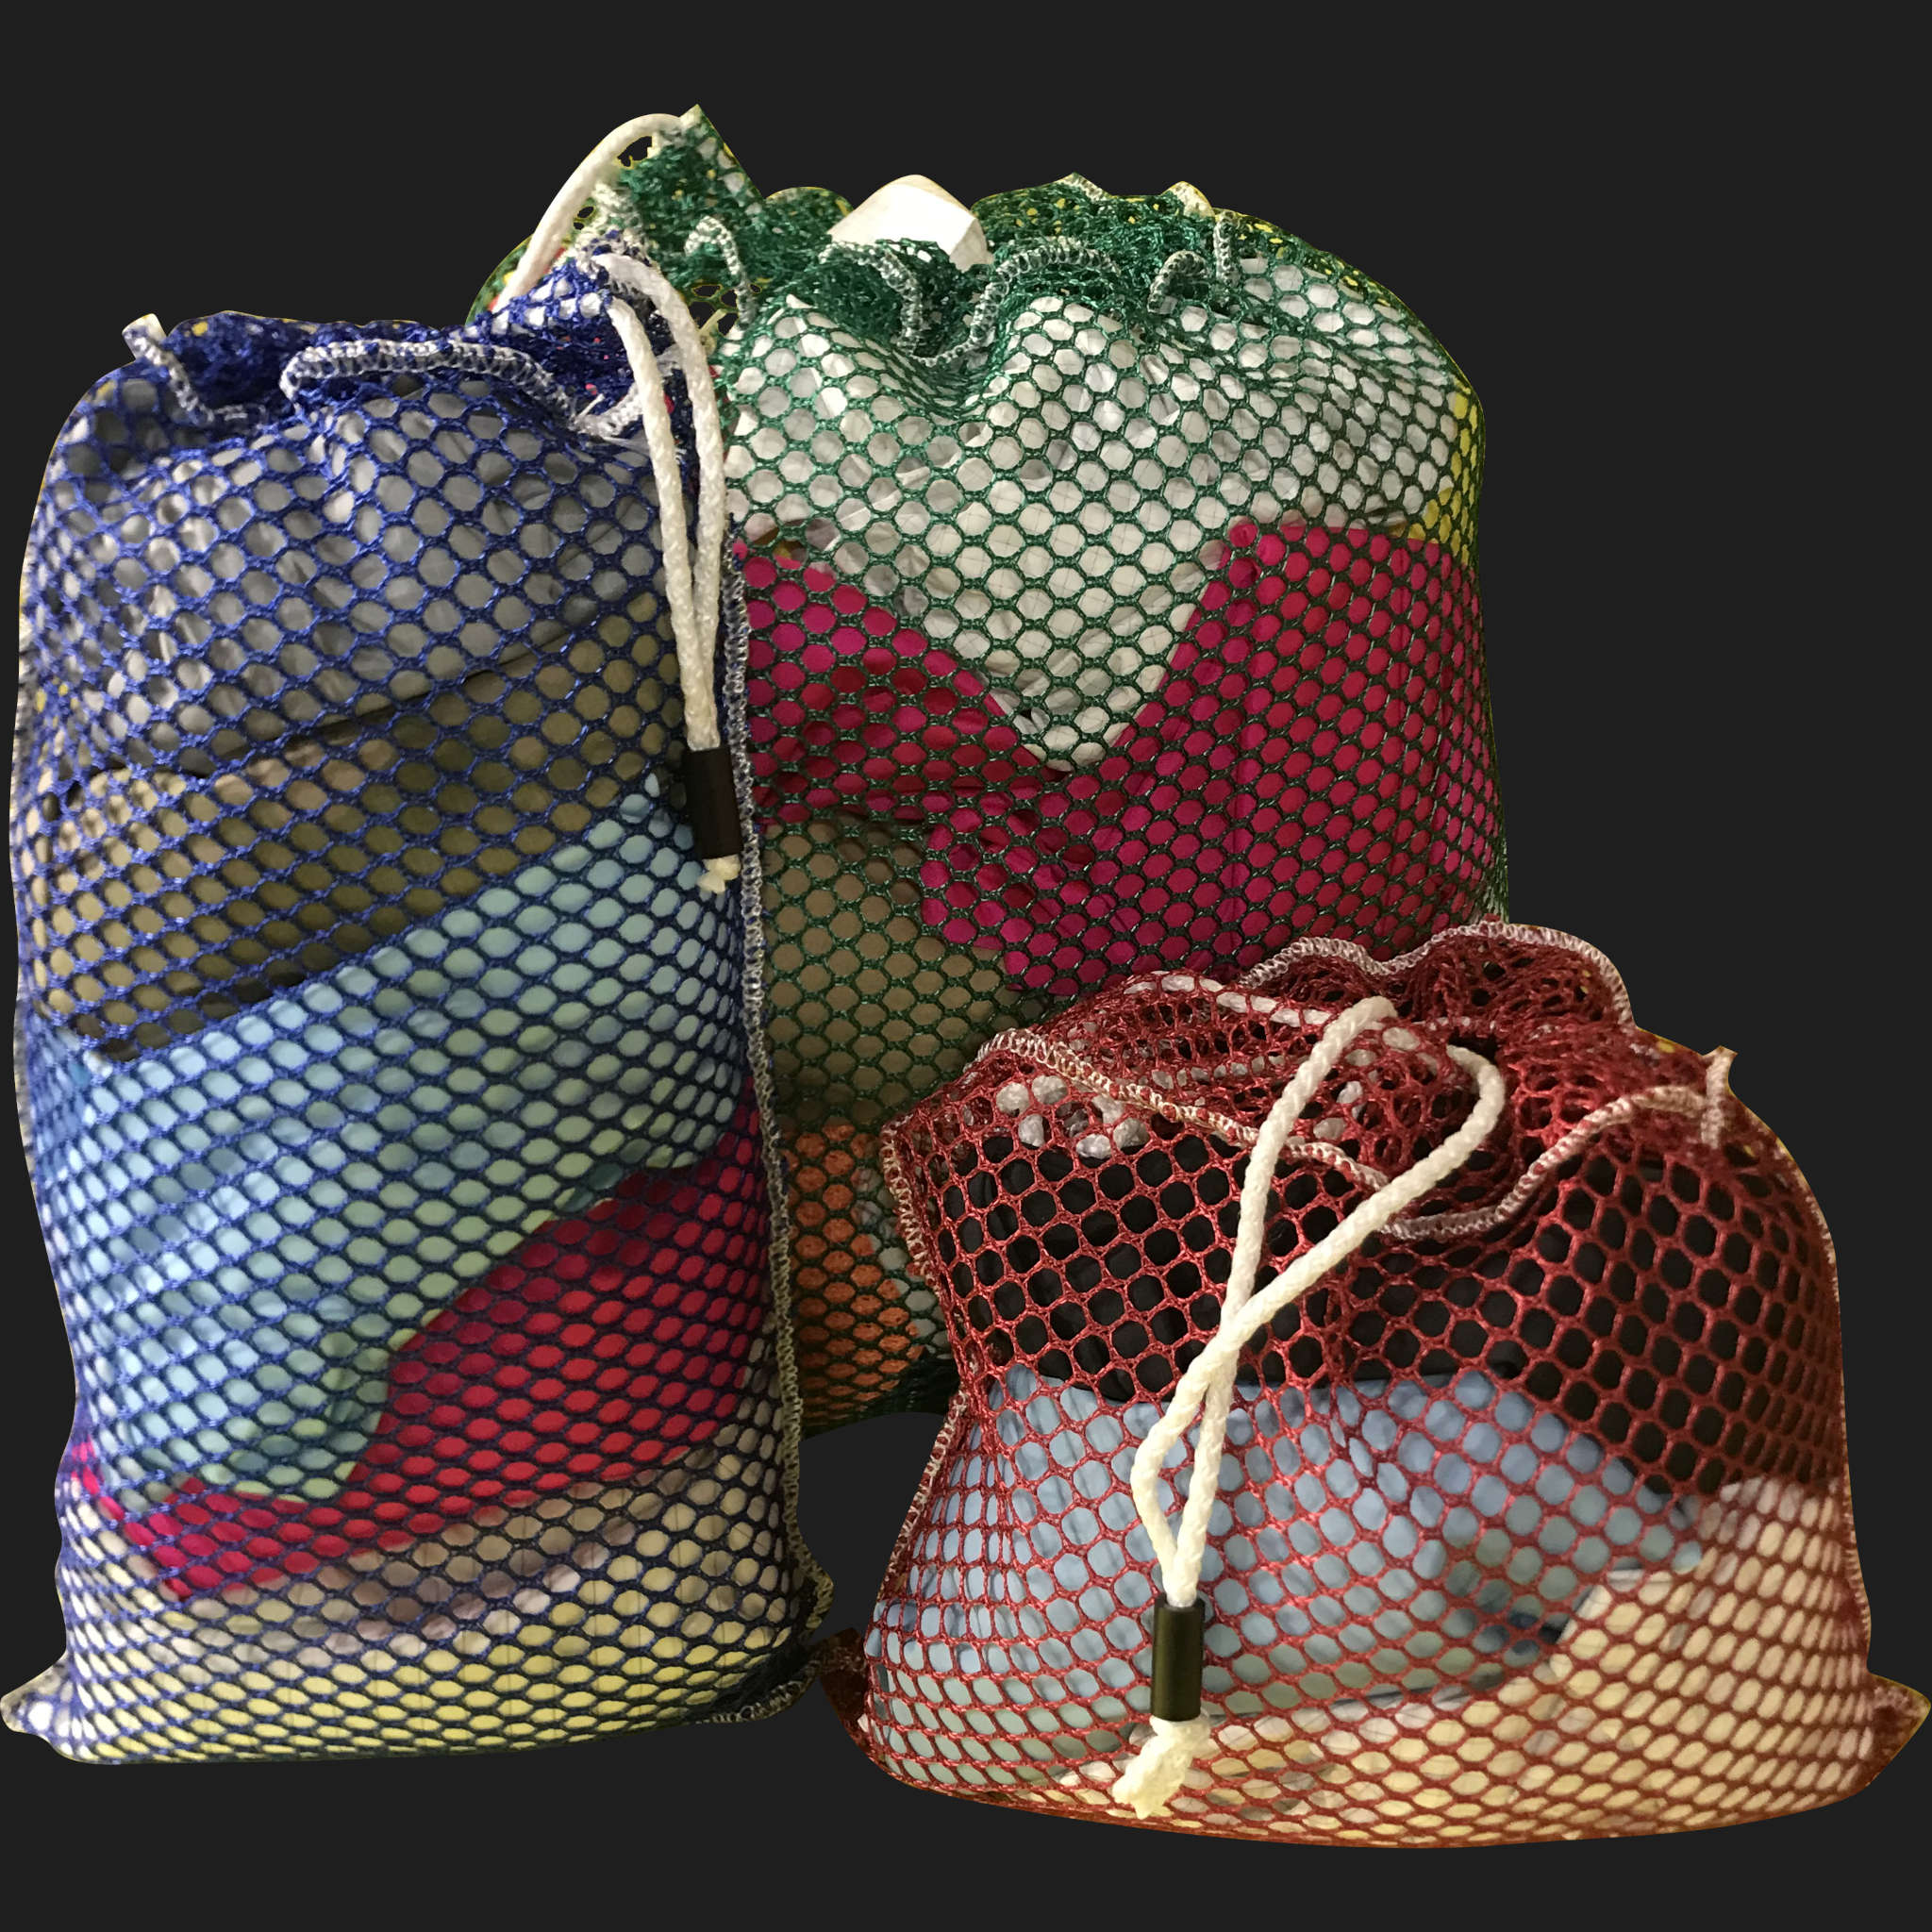 56" x 78" Customized Mesh-Net-Laundry Bags Heavy Duty with Cord and barrellock closure